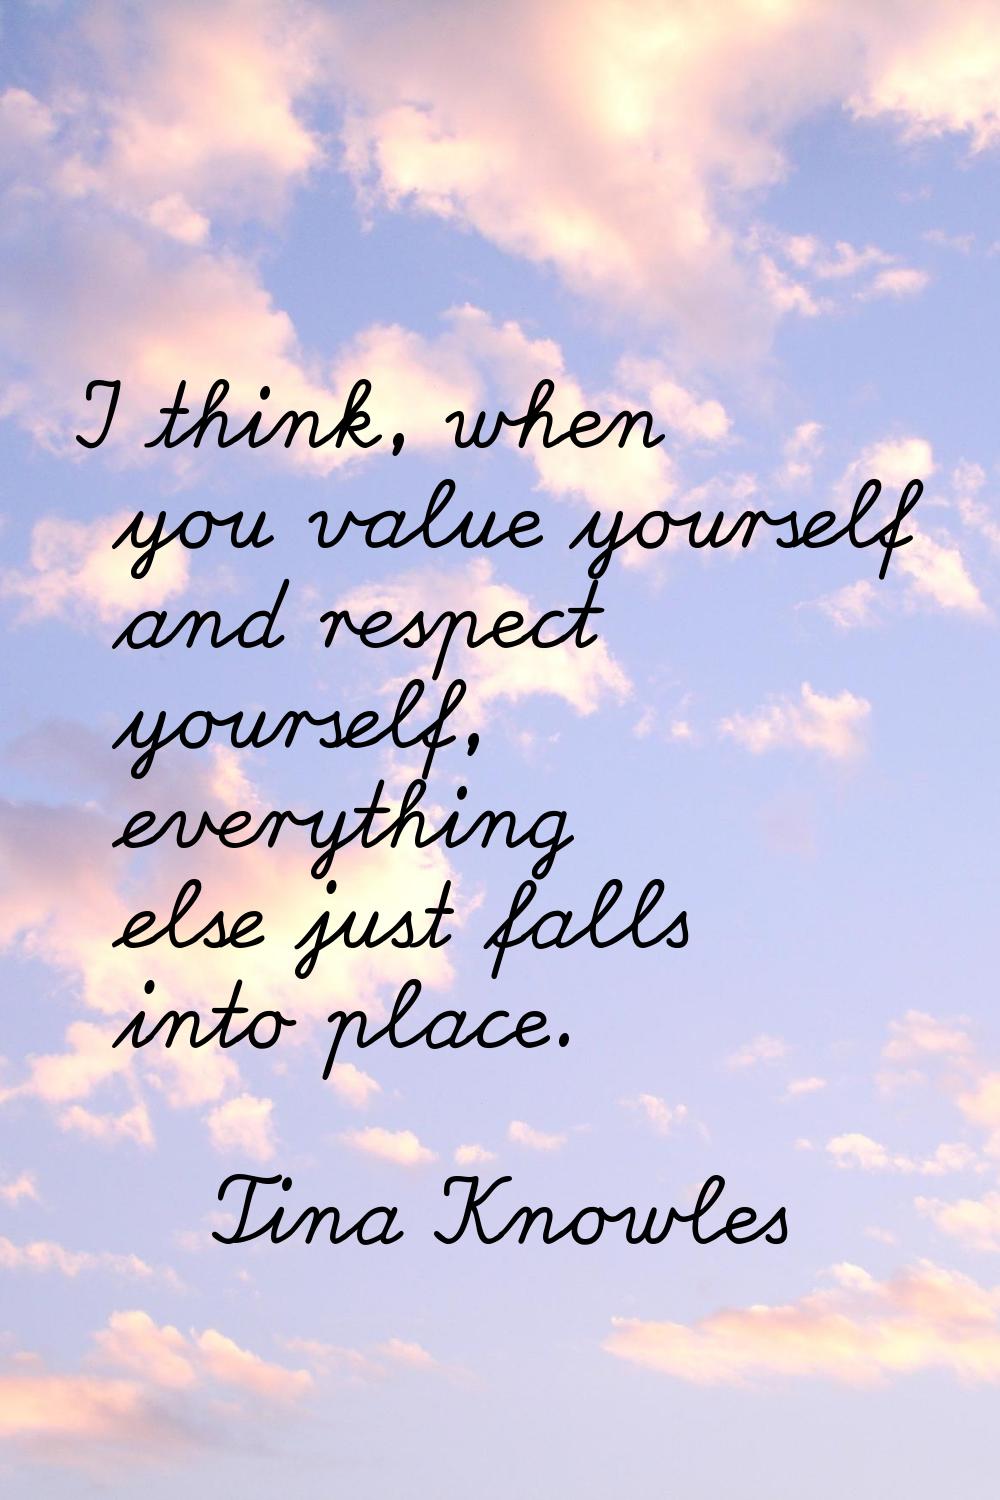 I think, when you value yourself and respect yourself, everything else just falls into place.